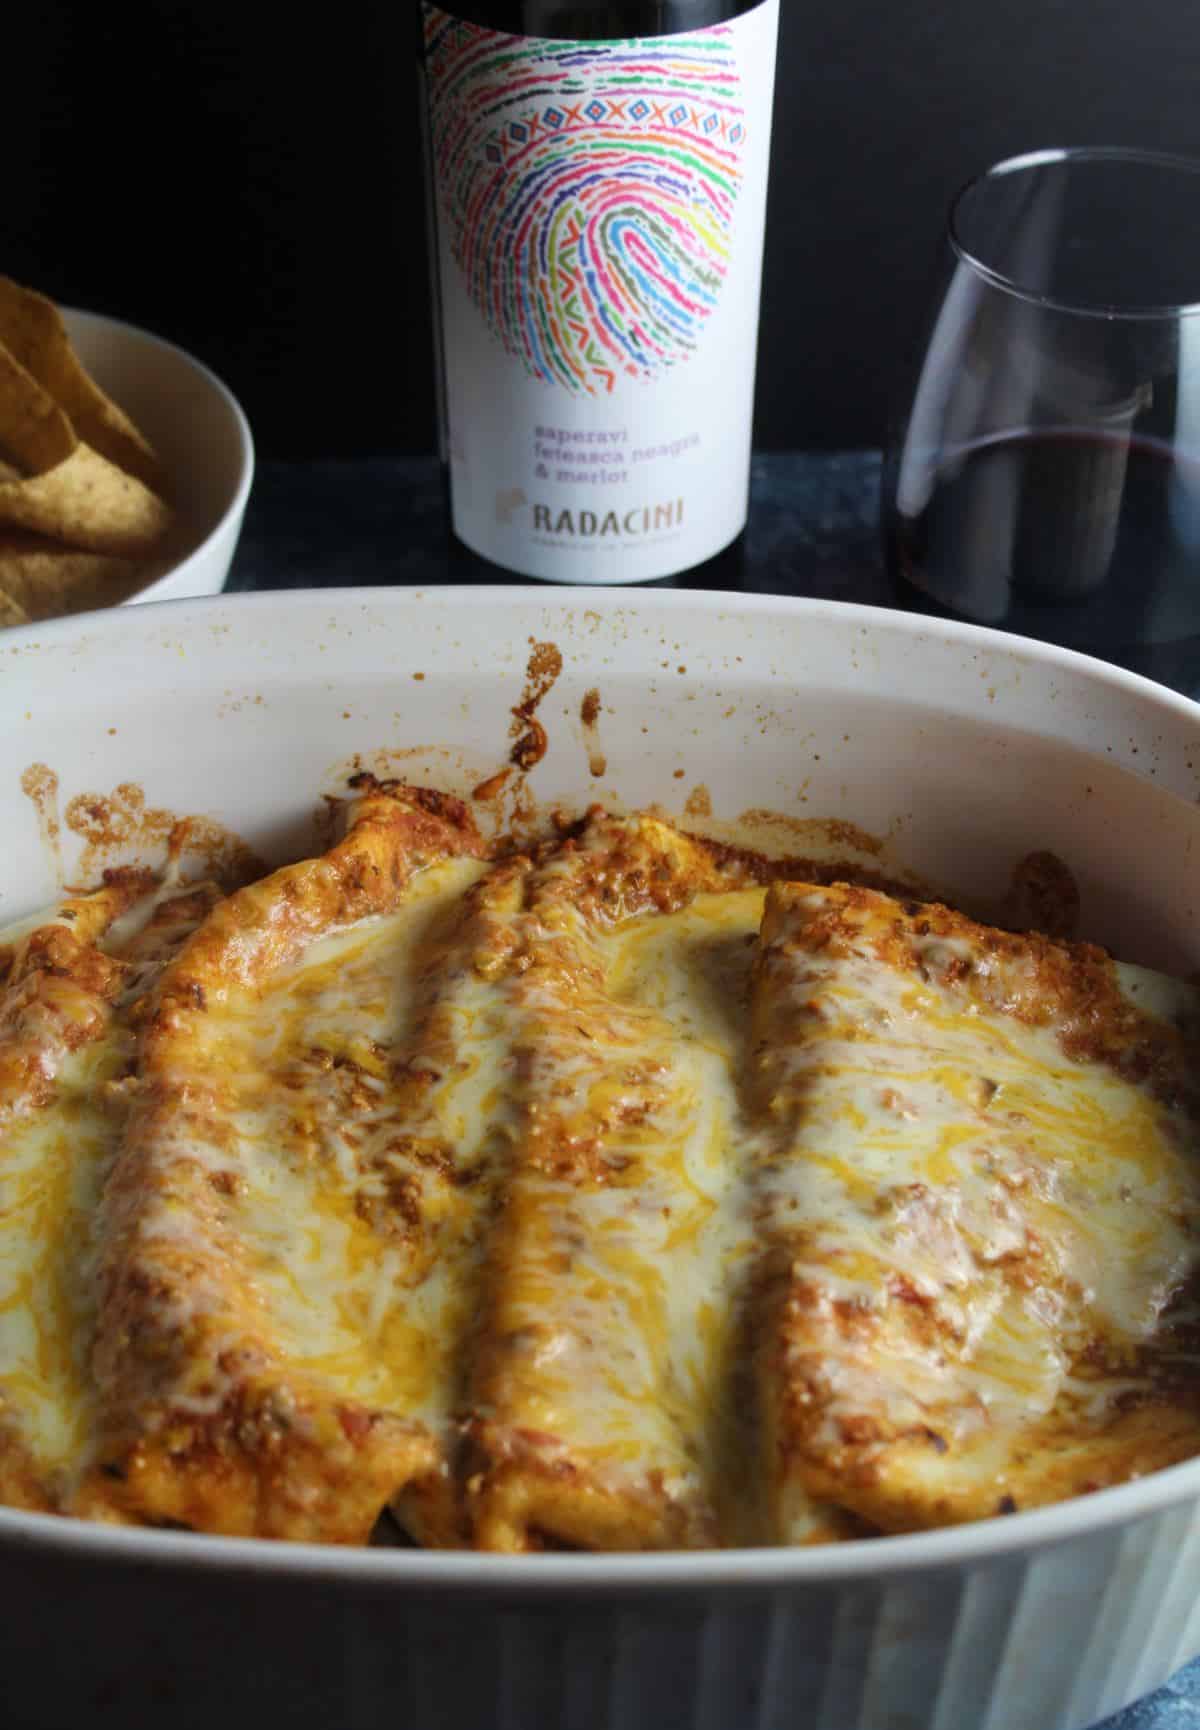 beef and bean enchiladas in a baking dish served with a red wine.